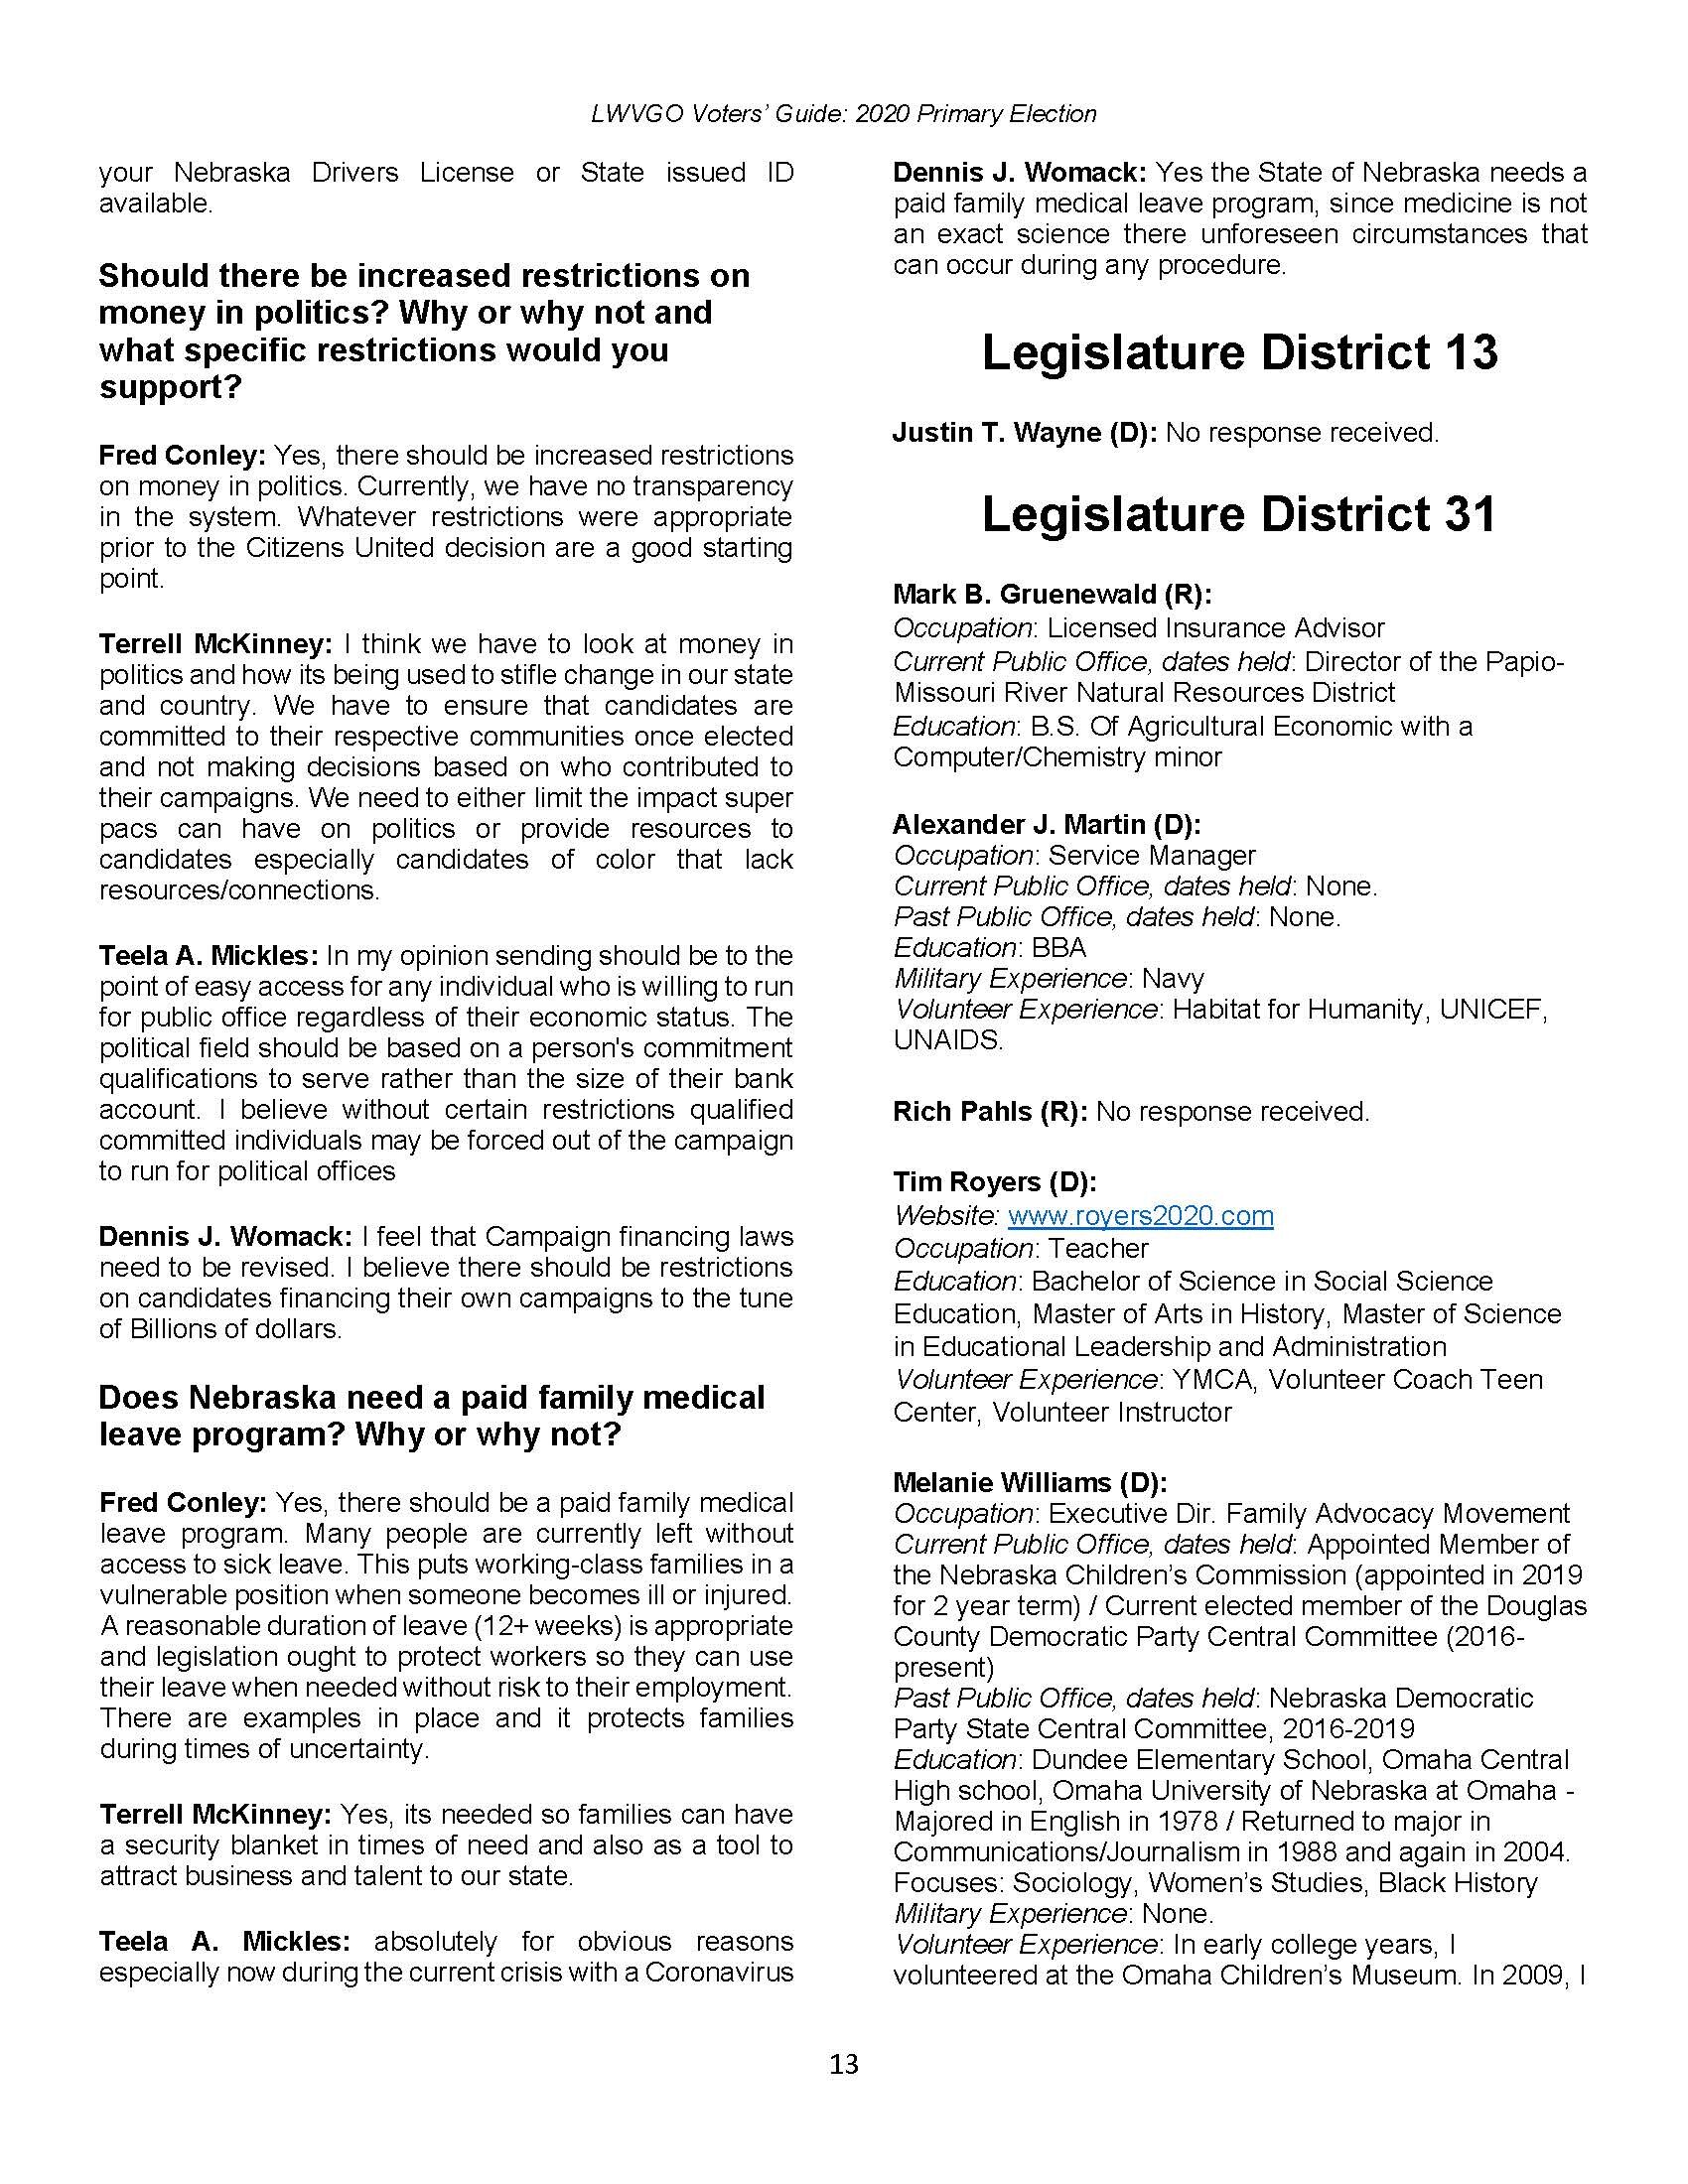 2020-Primary-Voters-Guide-LWVGO_0_Page_13.jpg